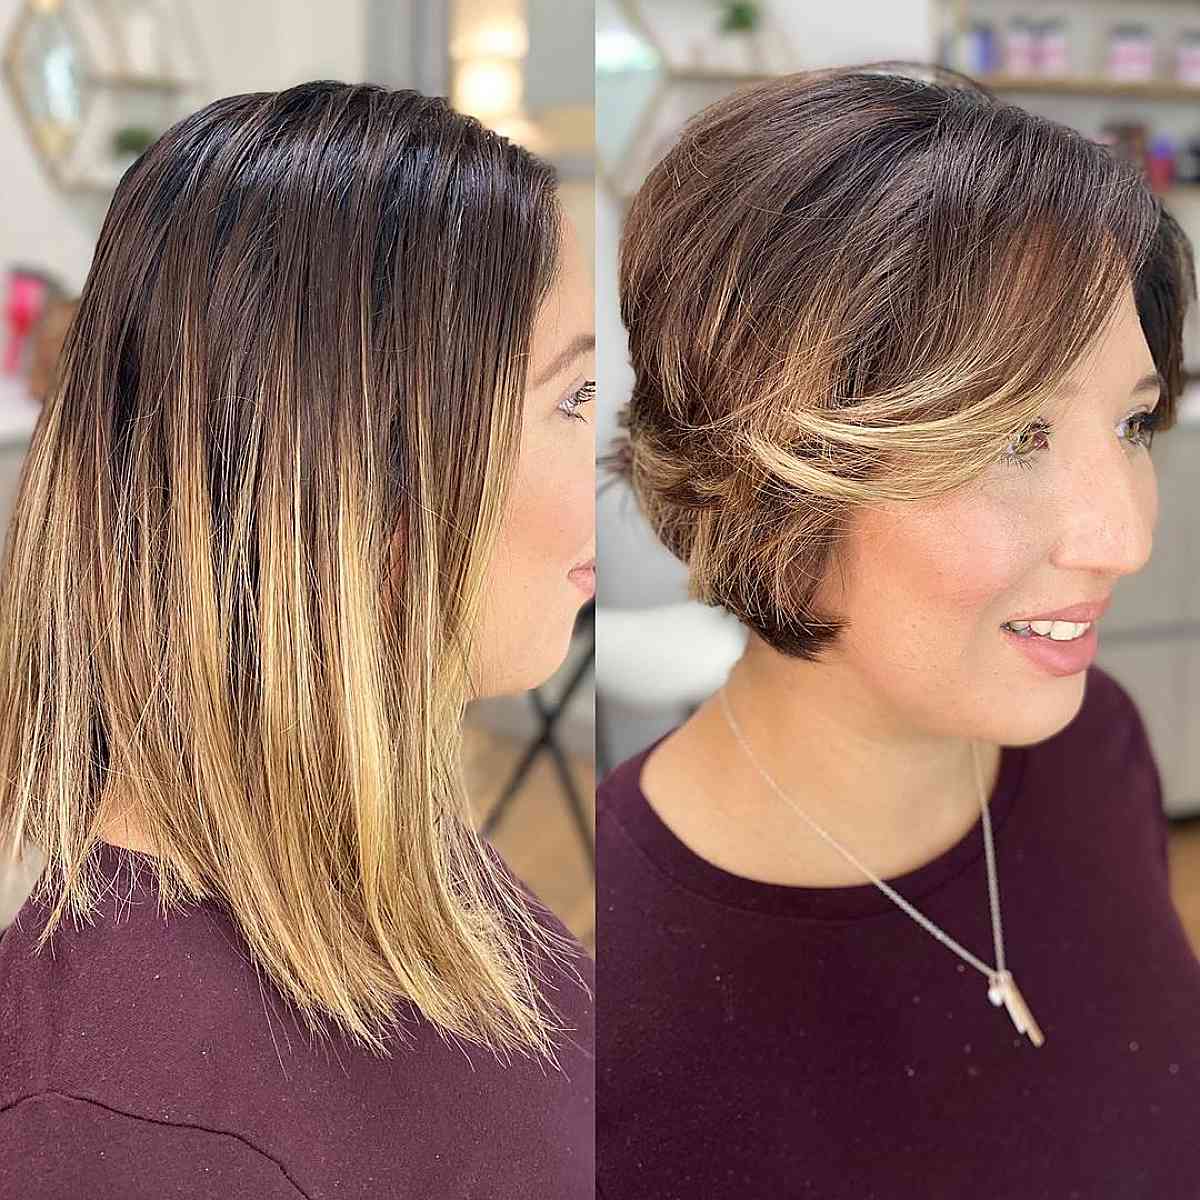 Long pixie cut before and after